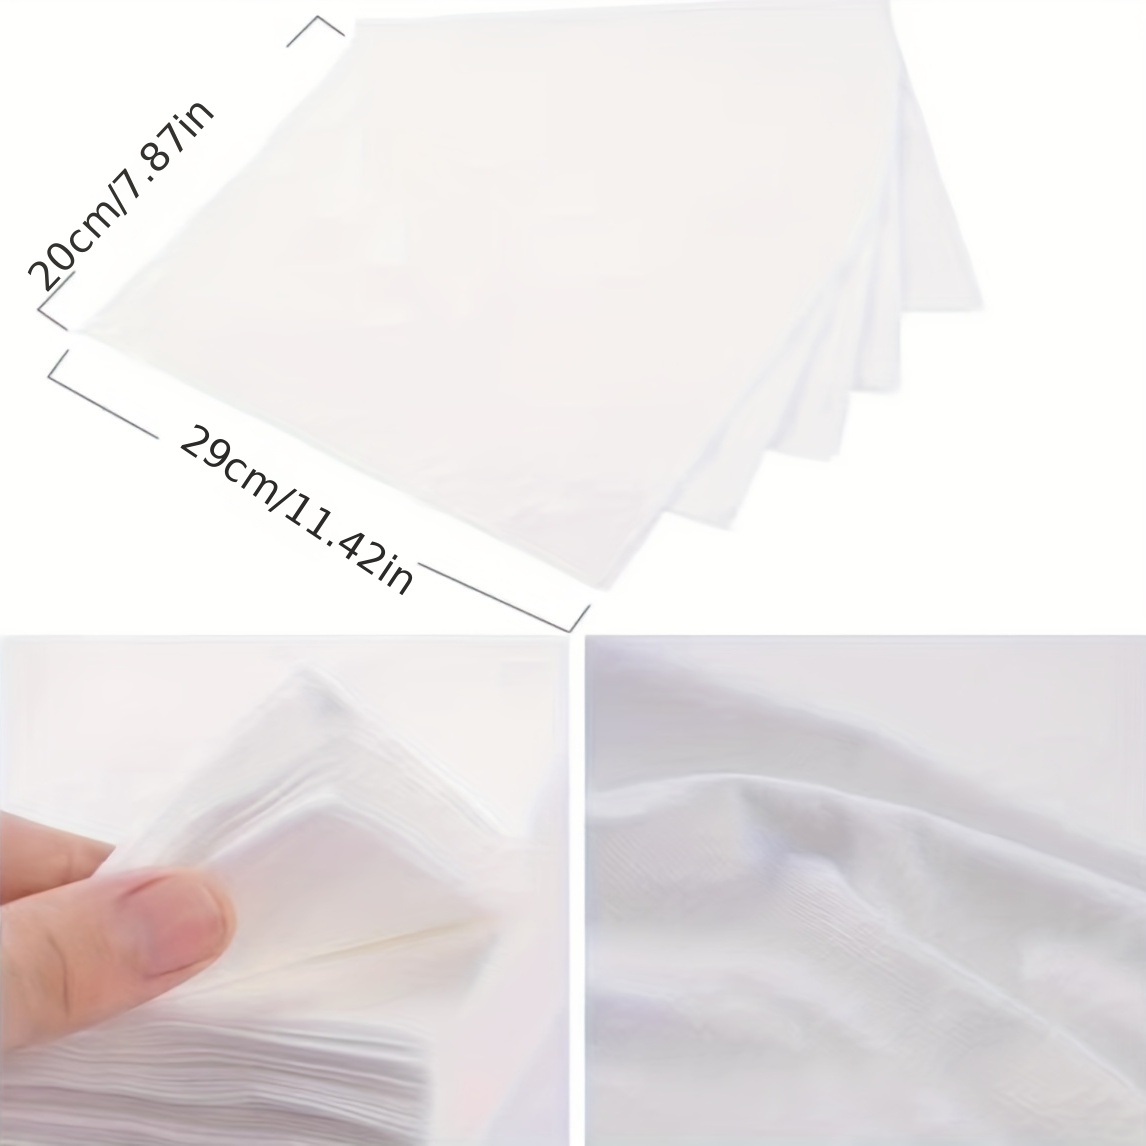 100pcs electrostatic cleaning cloth dust removal paper disposable household dust removal cloth for mop electrostatic mop pad for cleaning hardwood window laminated floor ceramic and tile floor cleaning supplies cleaning tool ready for school details 3